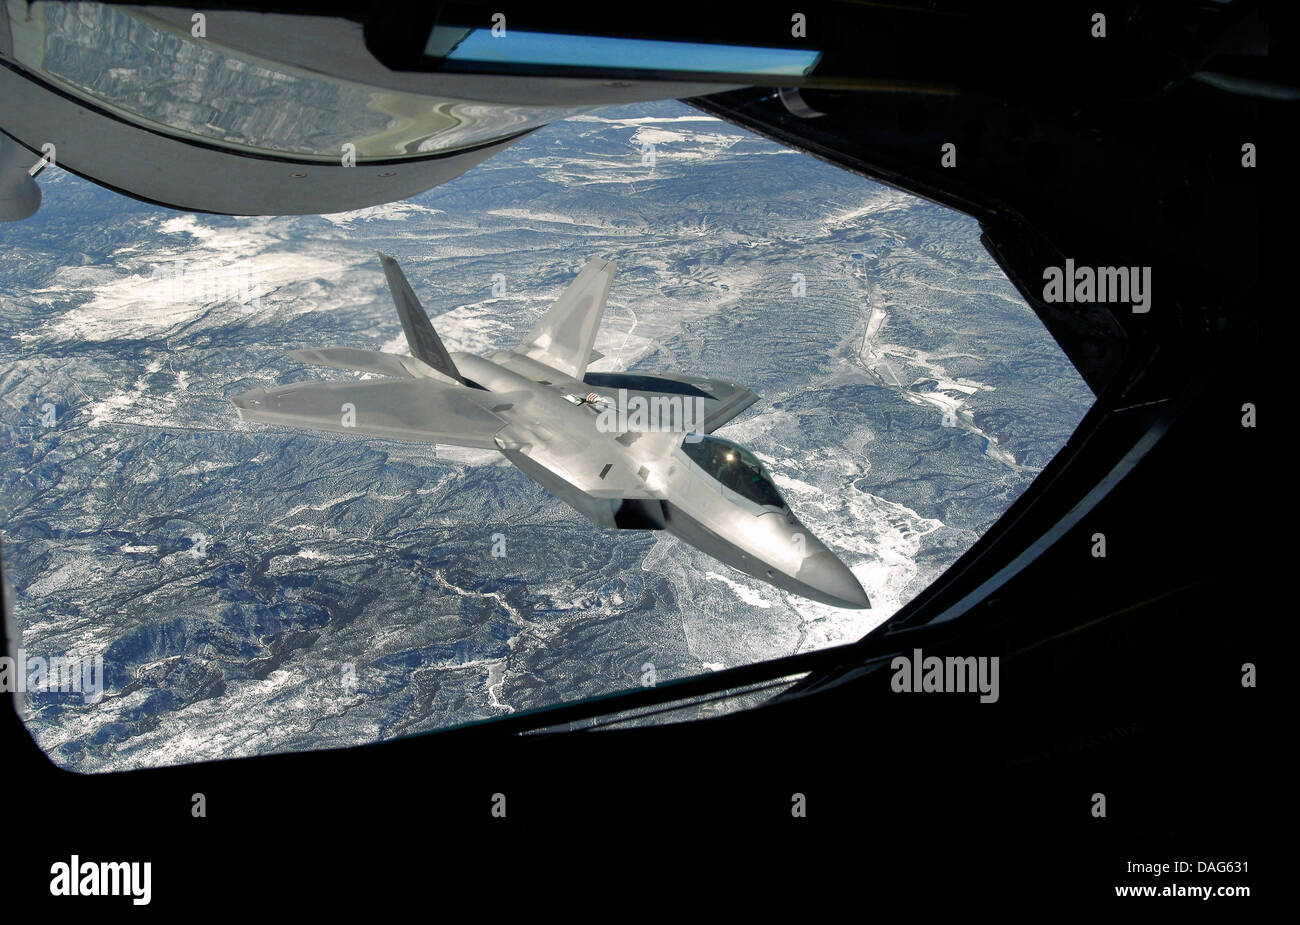 Kc 135 statotanker plane High Resolution Stock Photography and ...